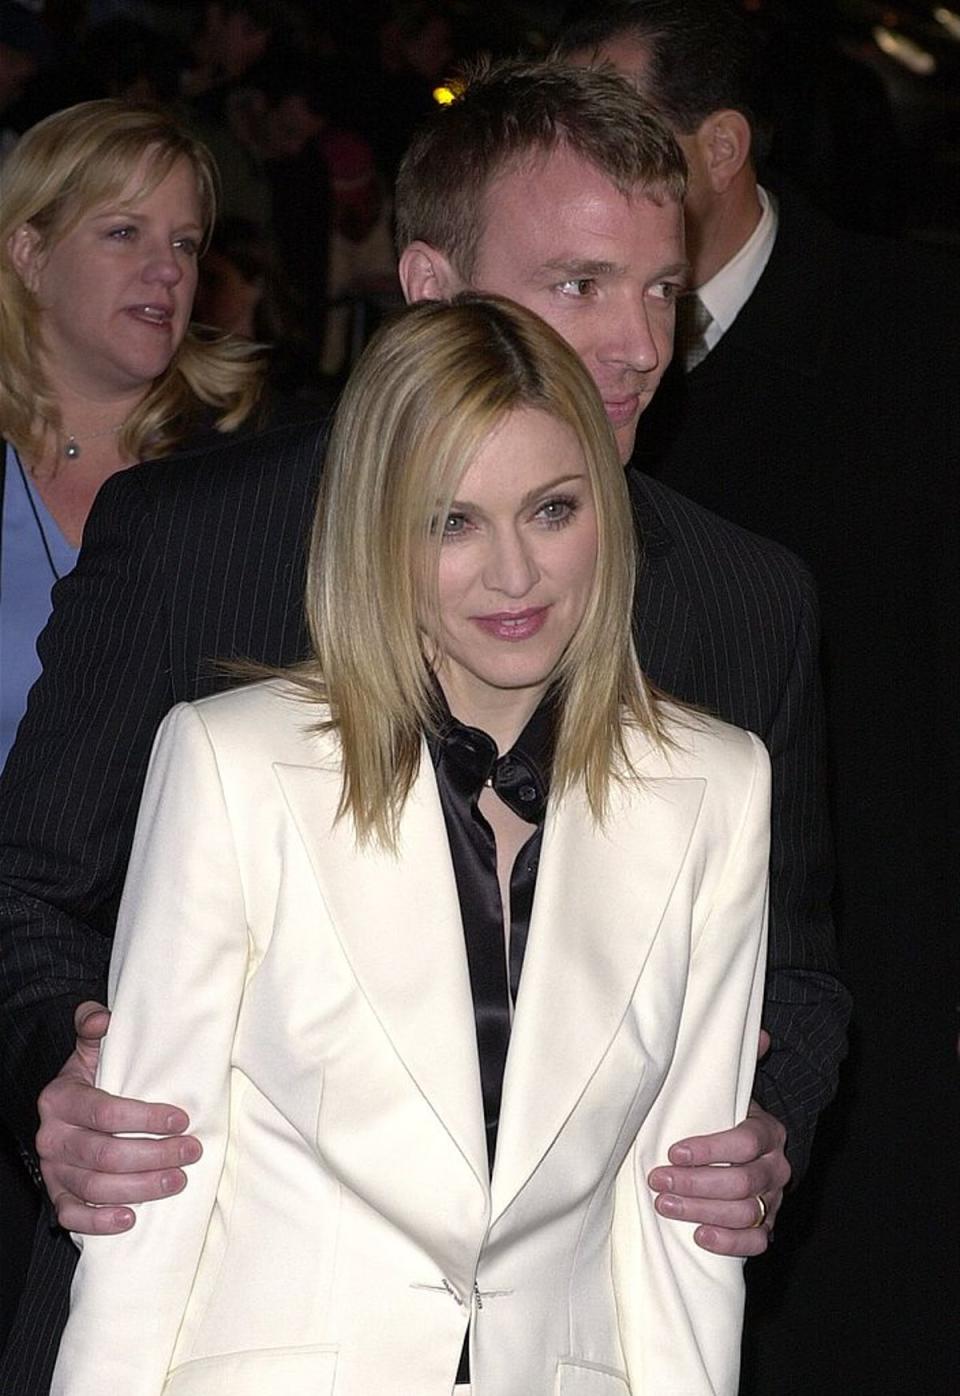 Guy Ritchie and Madonna, seen here at the ‘Snatch’ premiere in 2001, would marry in 2000 and divorce in 2008 (Getty Images)